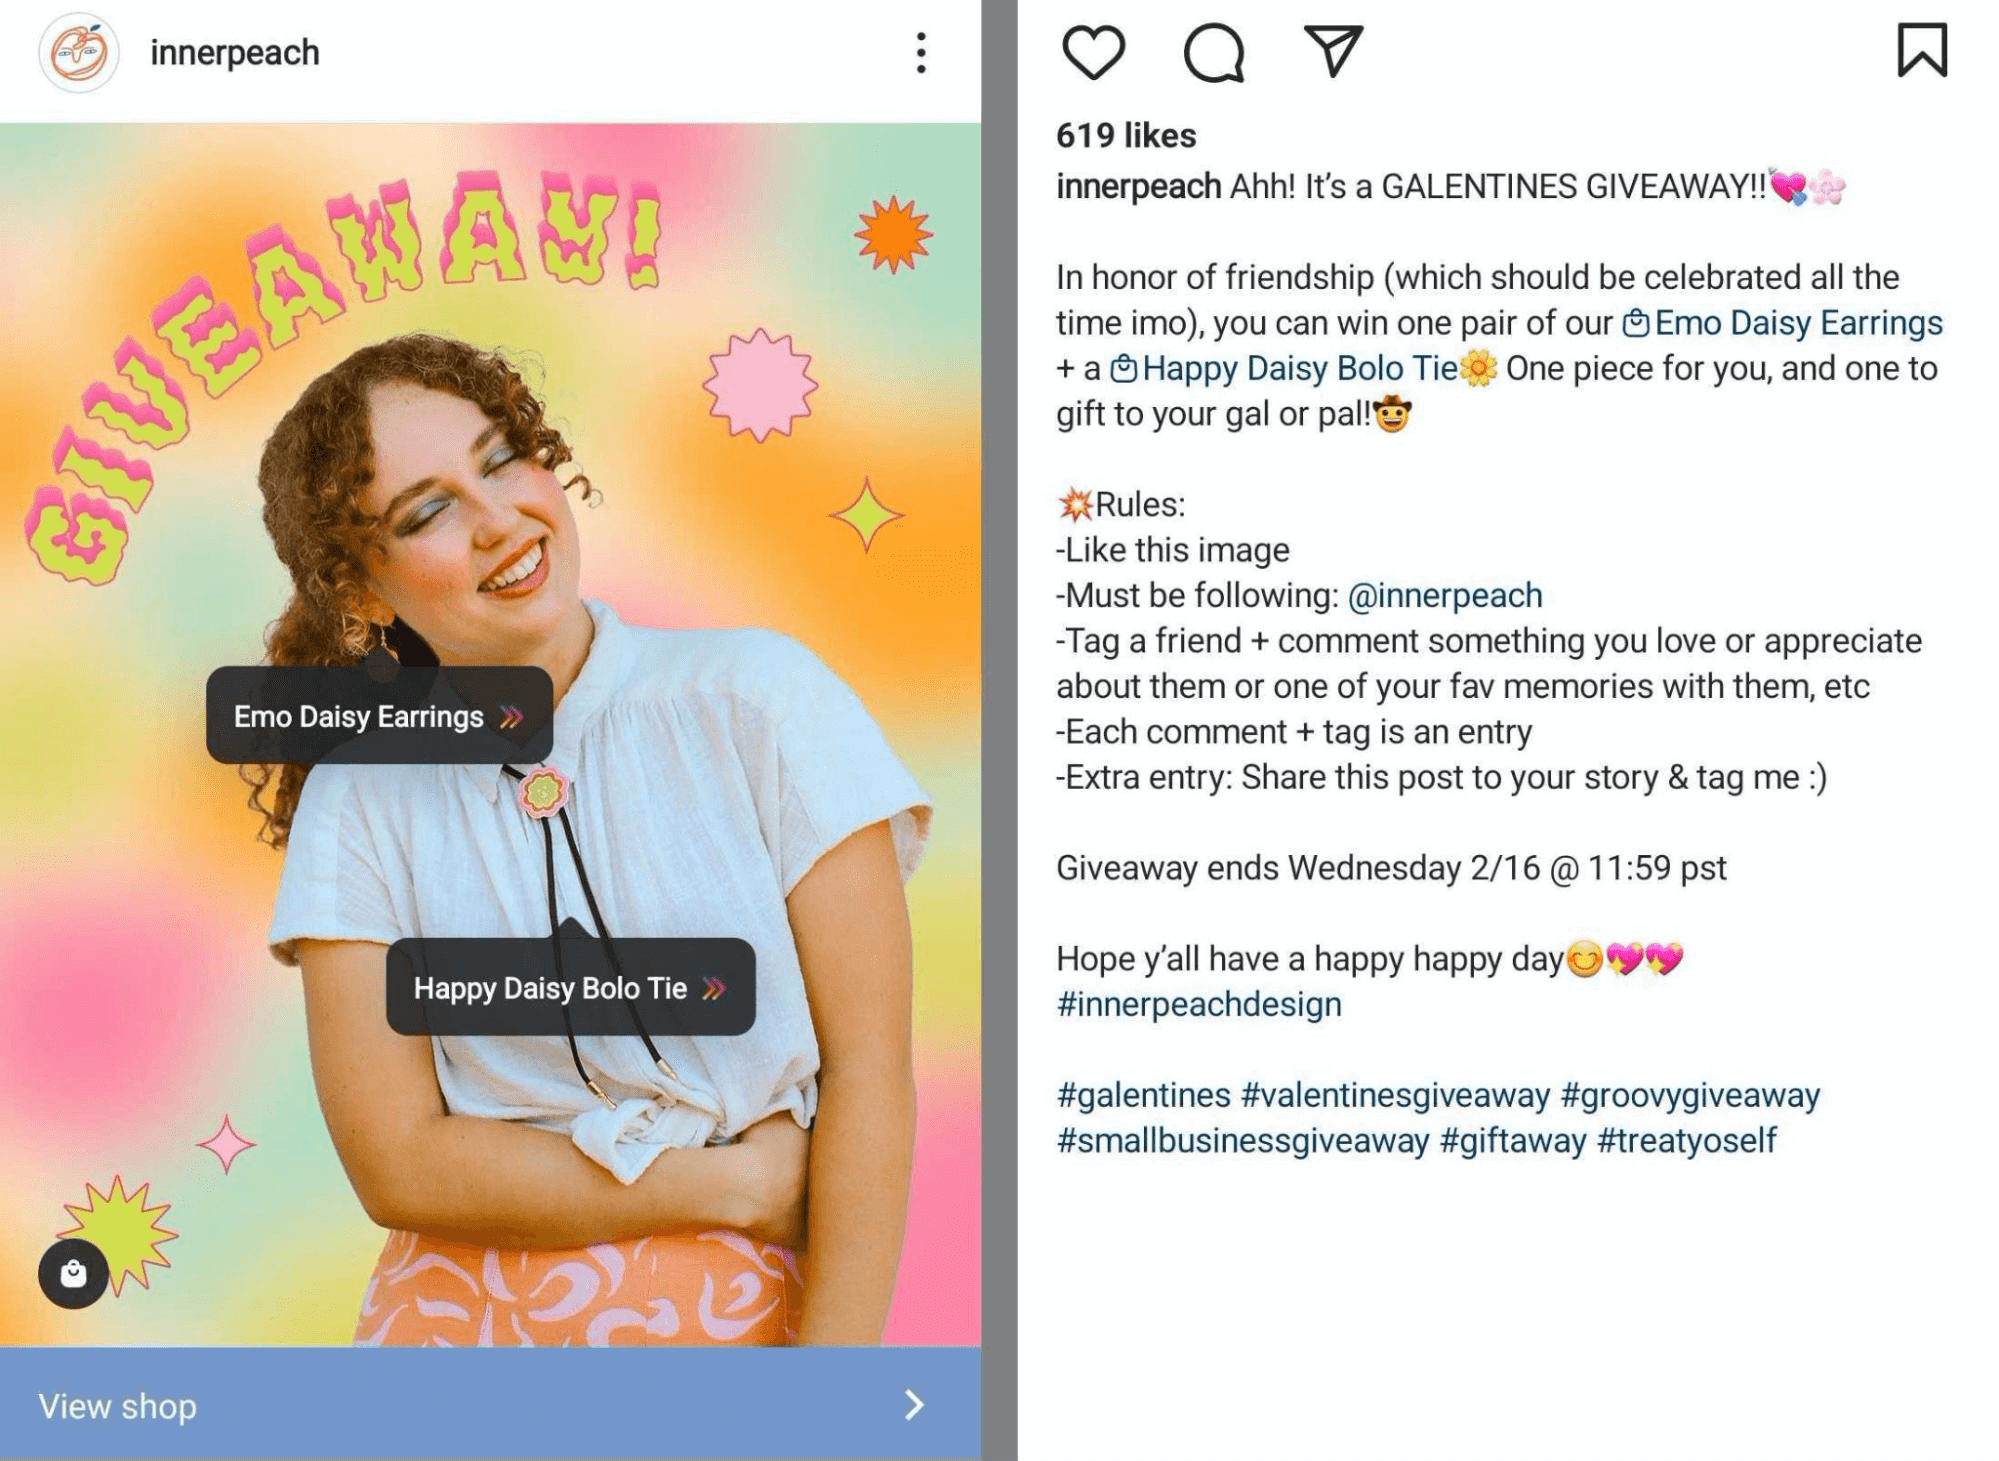 image of Instagram post sharing giveaway